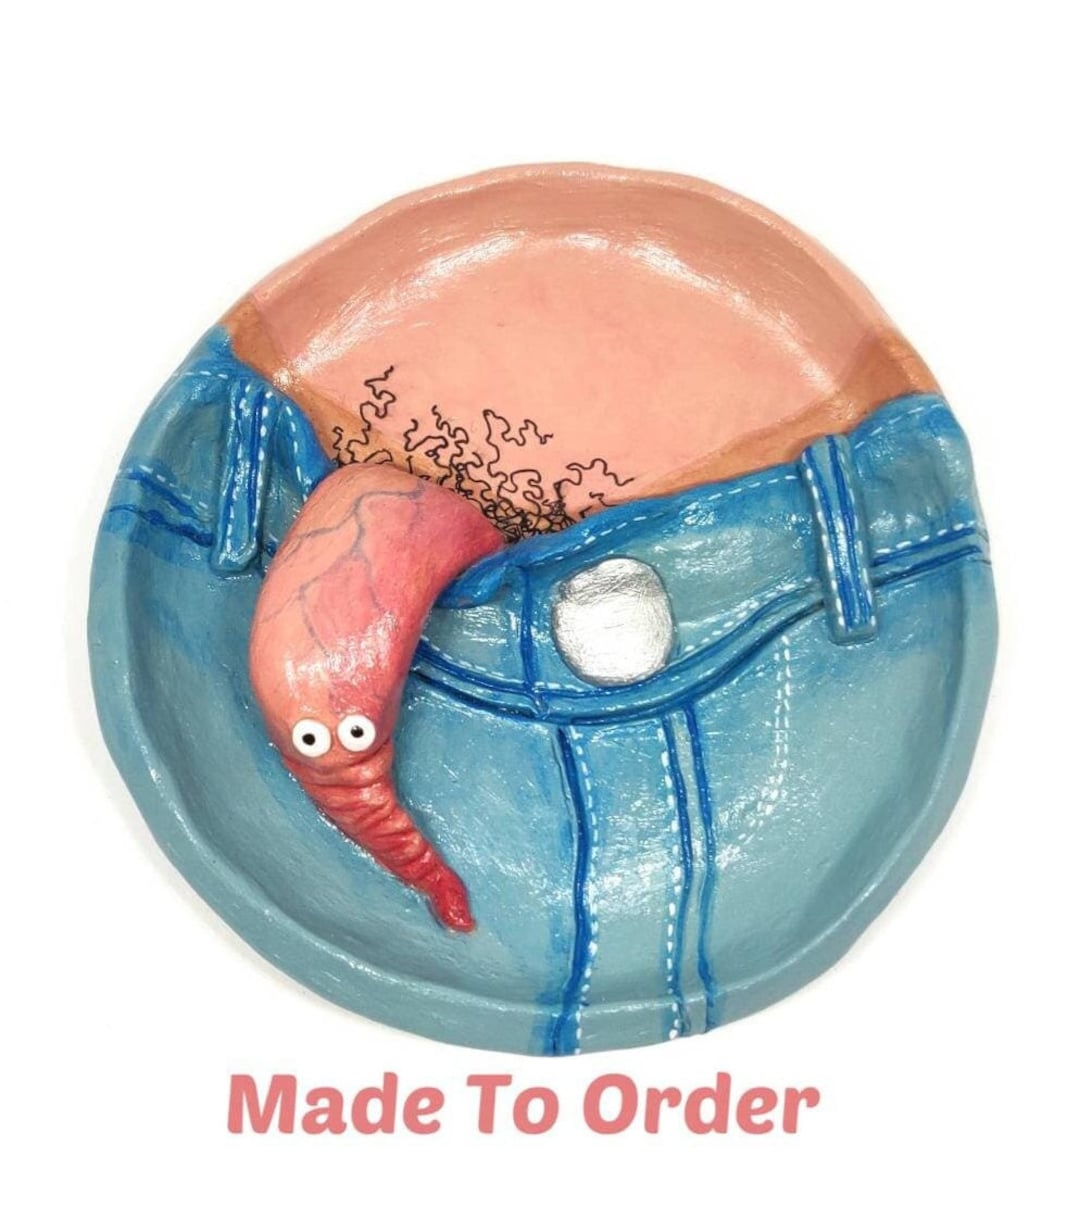 Worm Penis Trinket Dish Naughty Gifts for Fun People Weird image